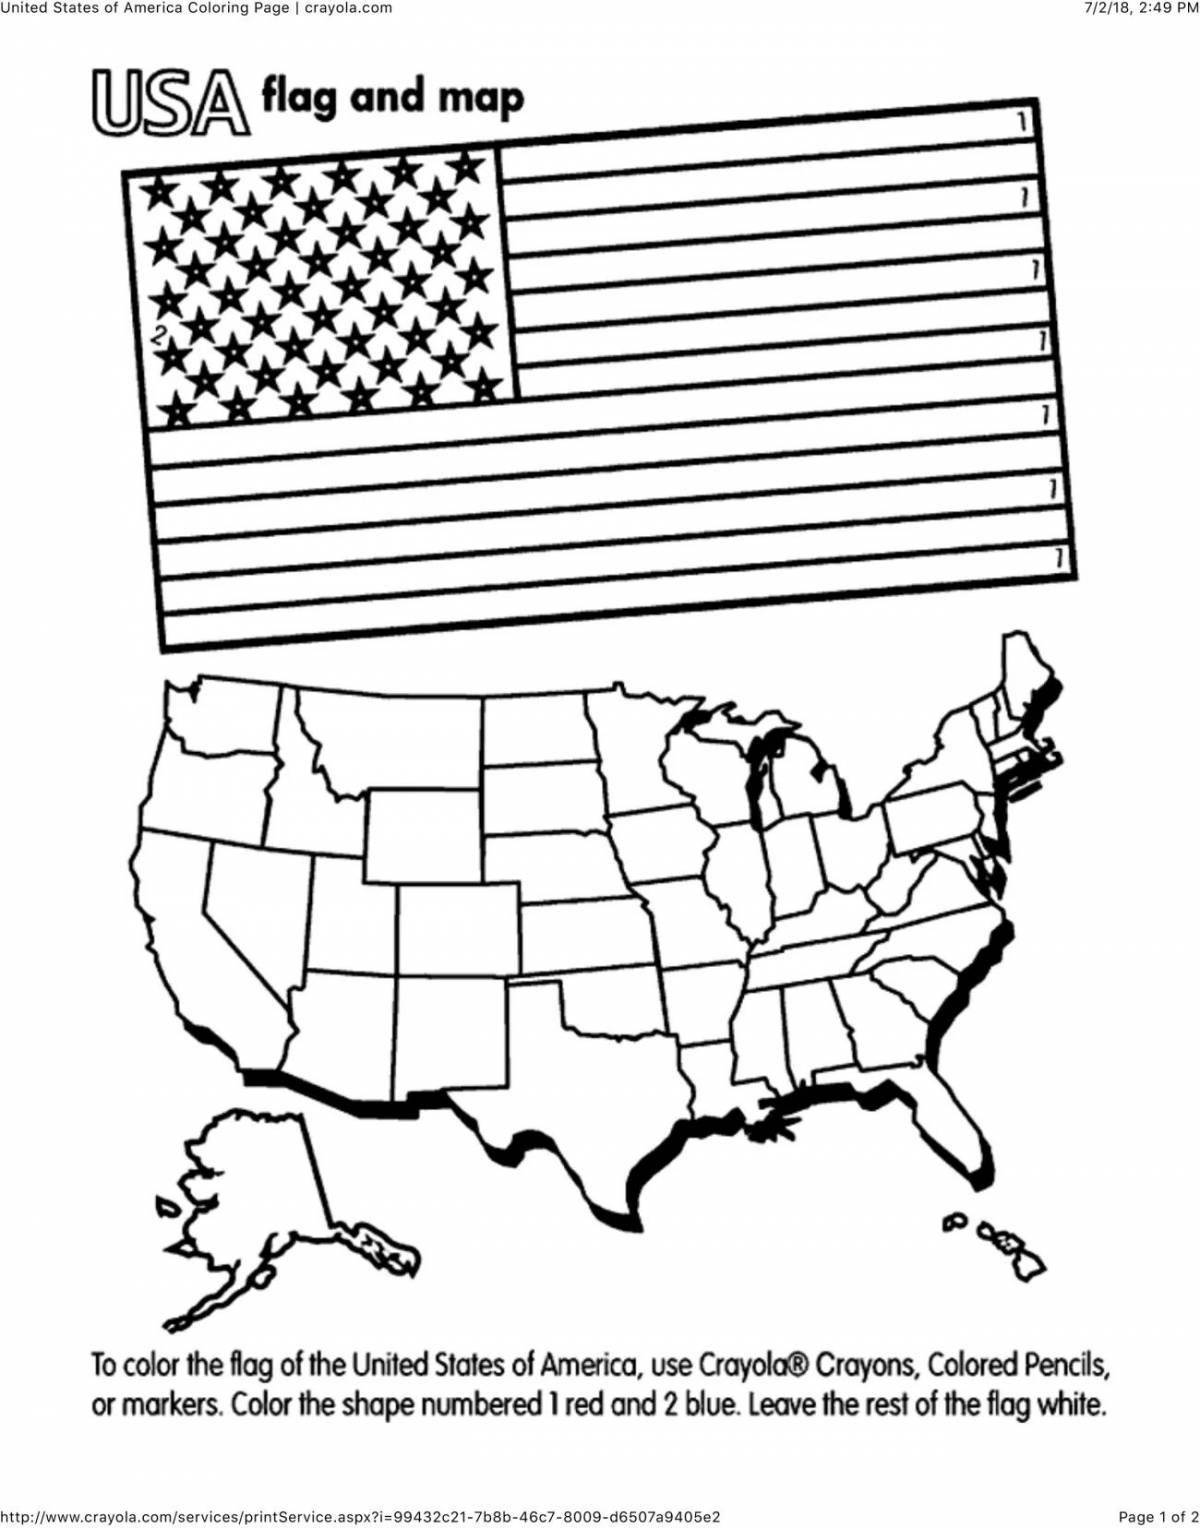 Coloring page adorable usa map